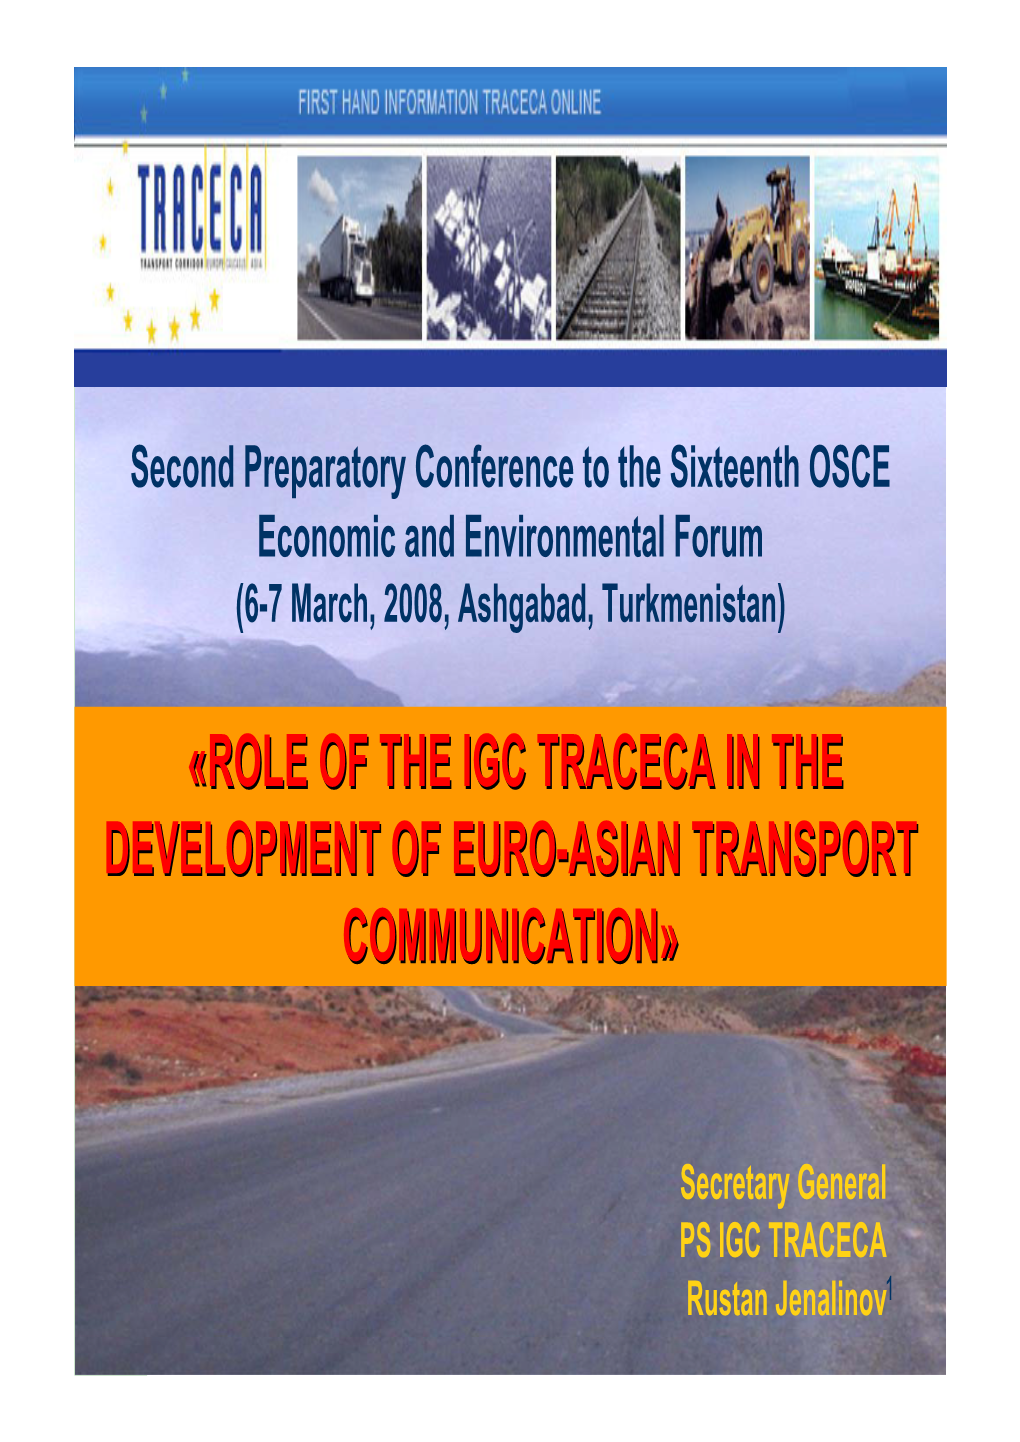 Role of the Igc Traceca in the Development of Euro